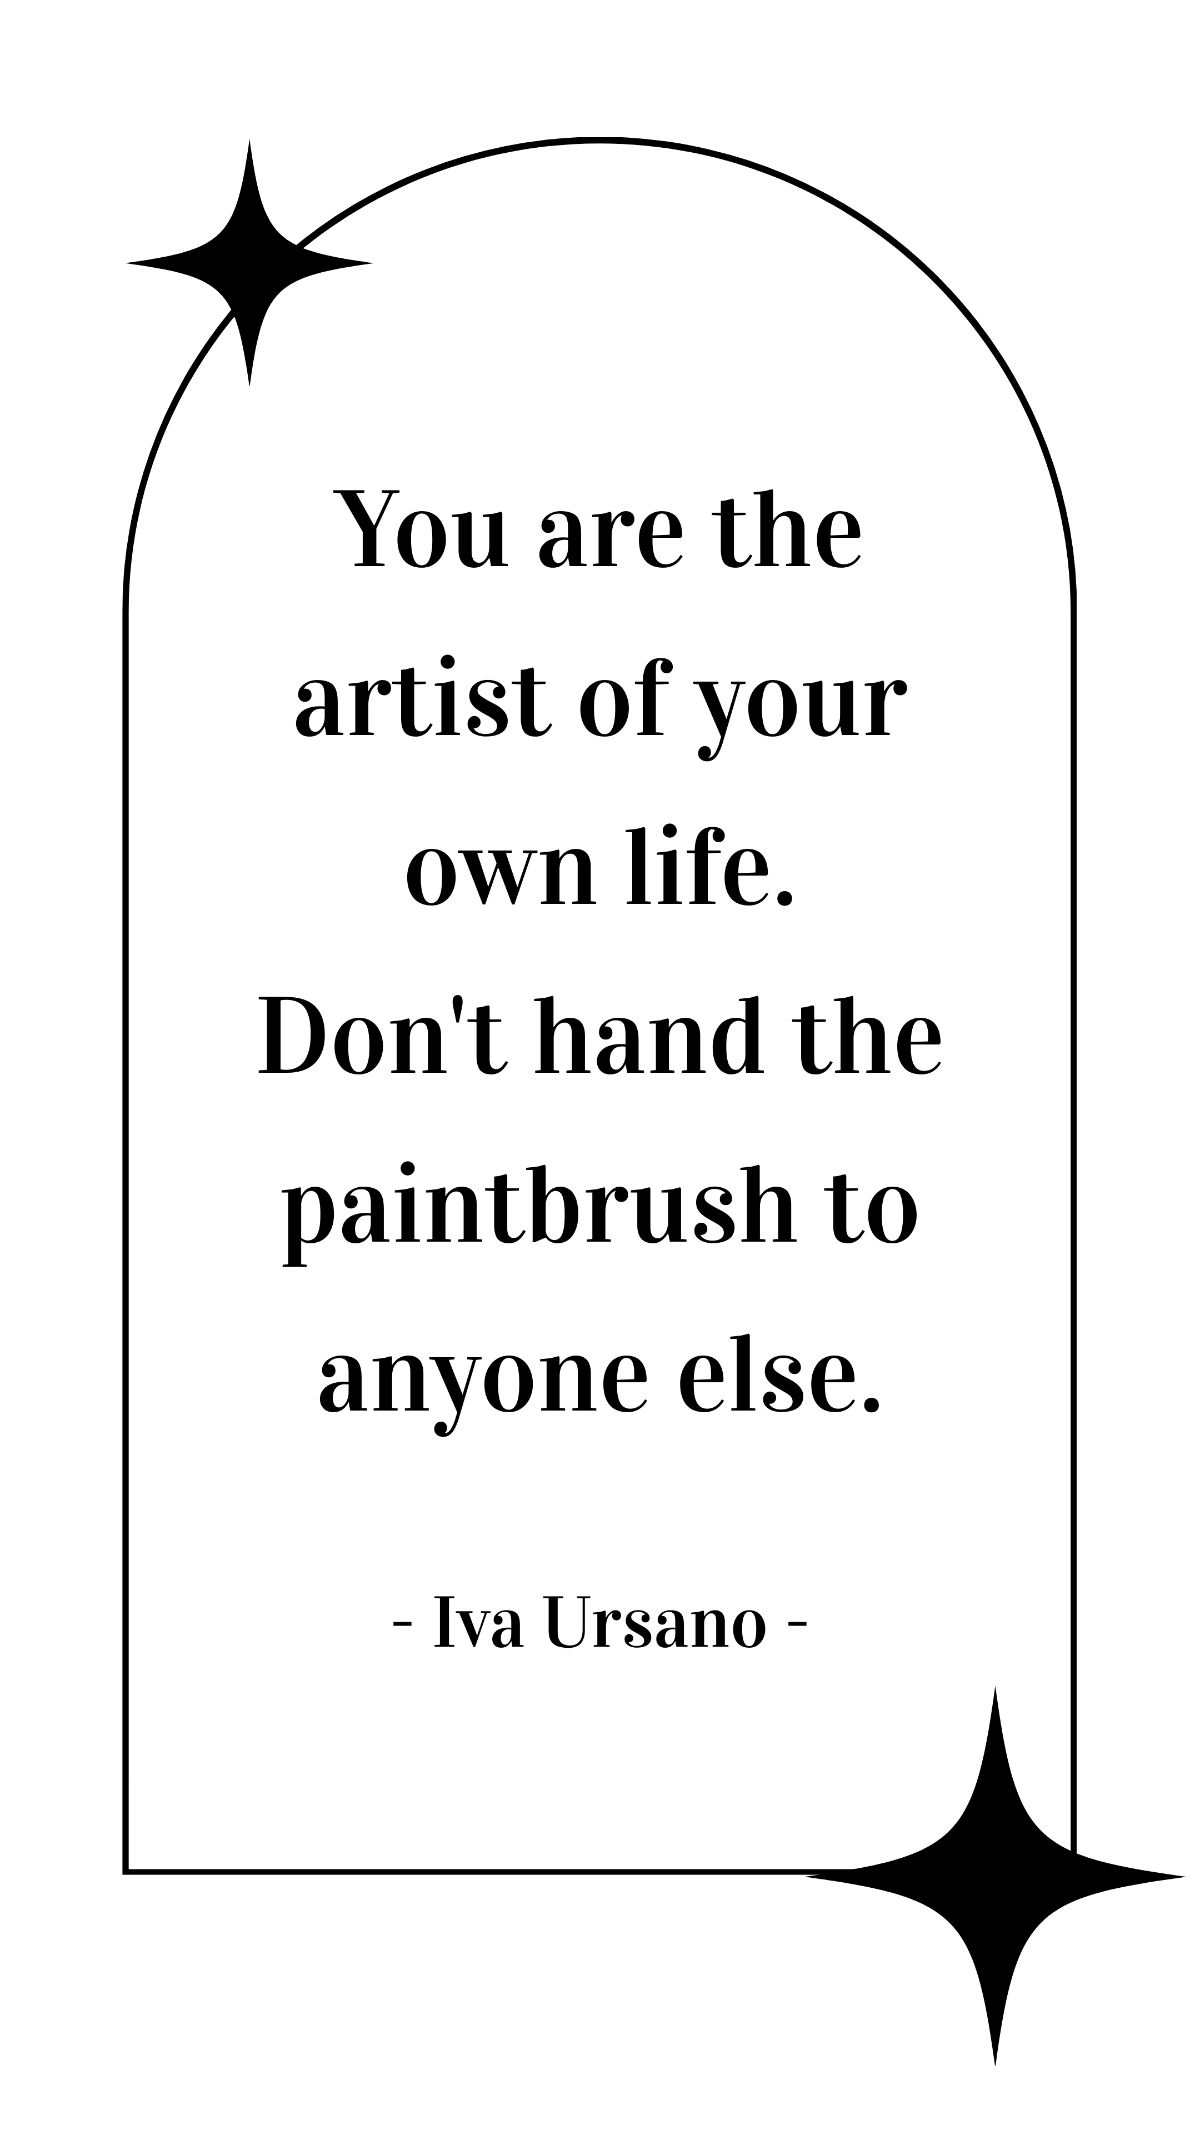 Iva Ursano - You are the artist of your own life, Don't hand the paintbrush to anyone else. Template